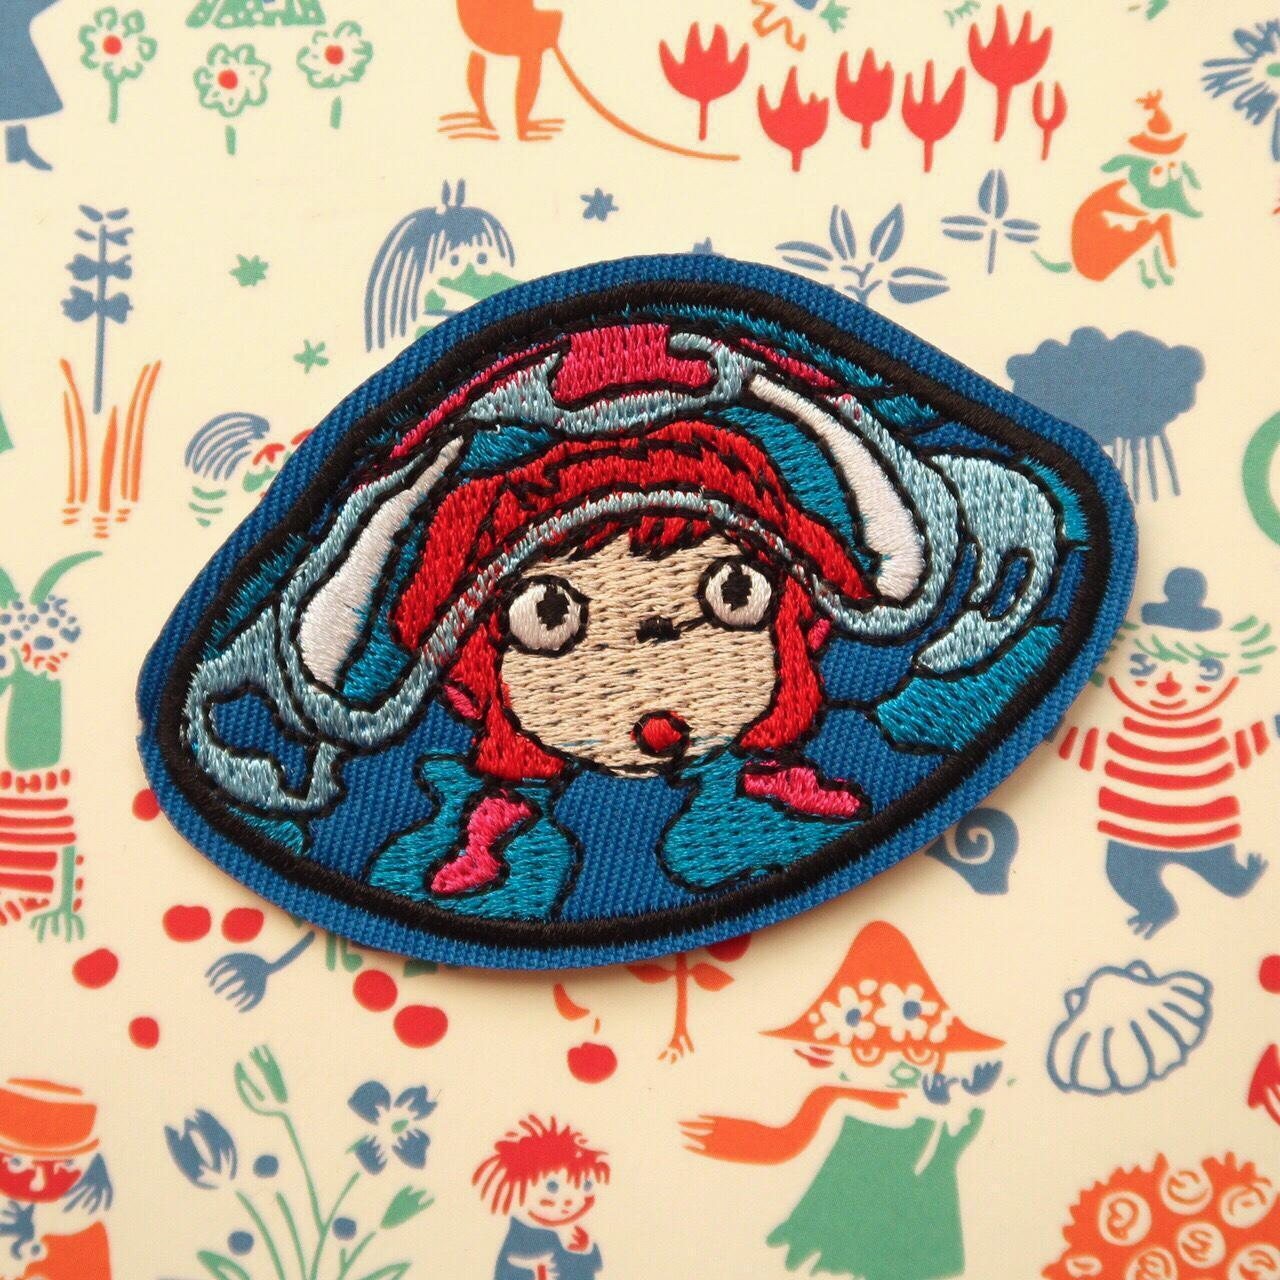 Underwater Ponyo embroidered iron-on patch badge applique